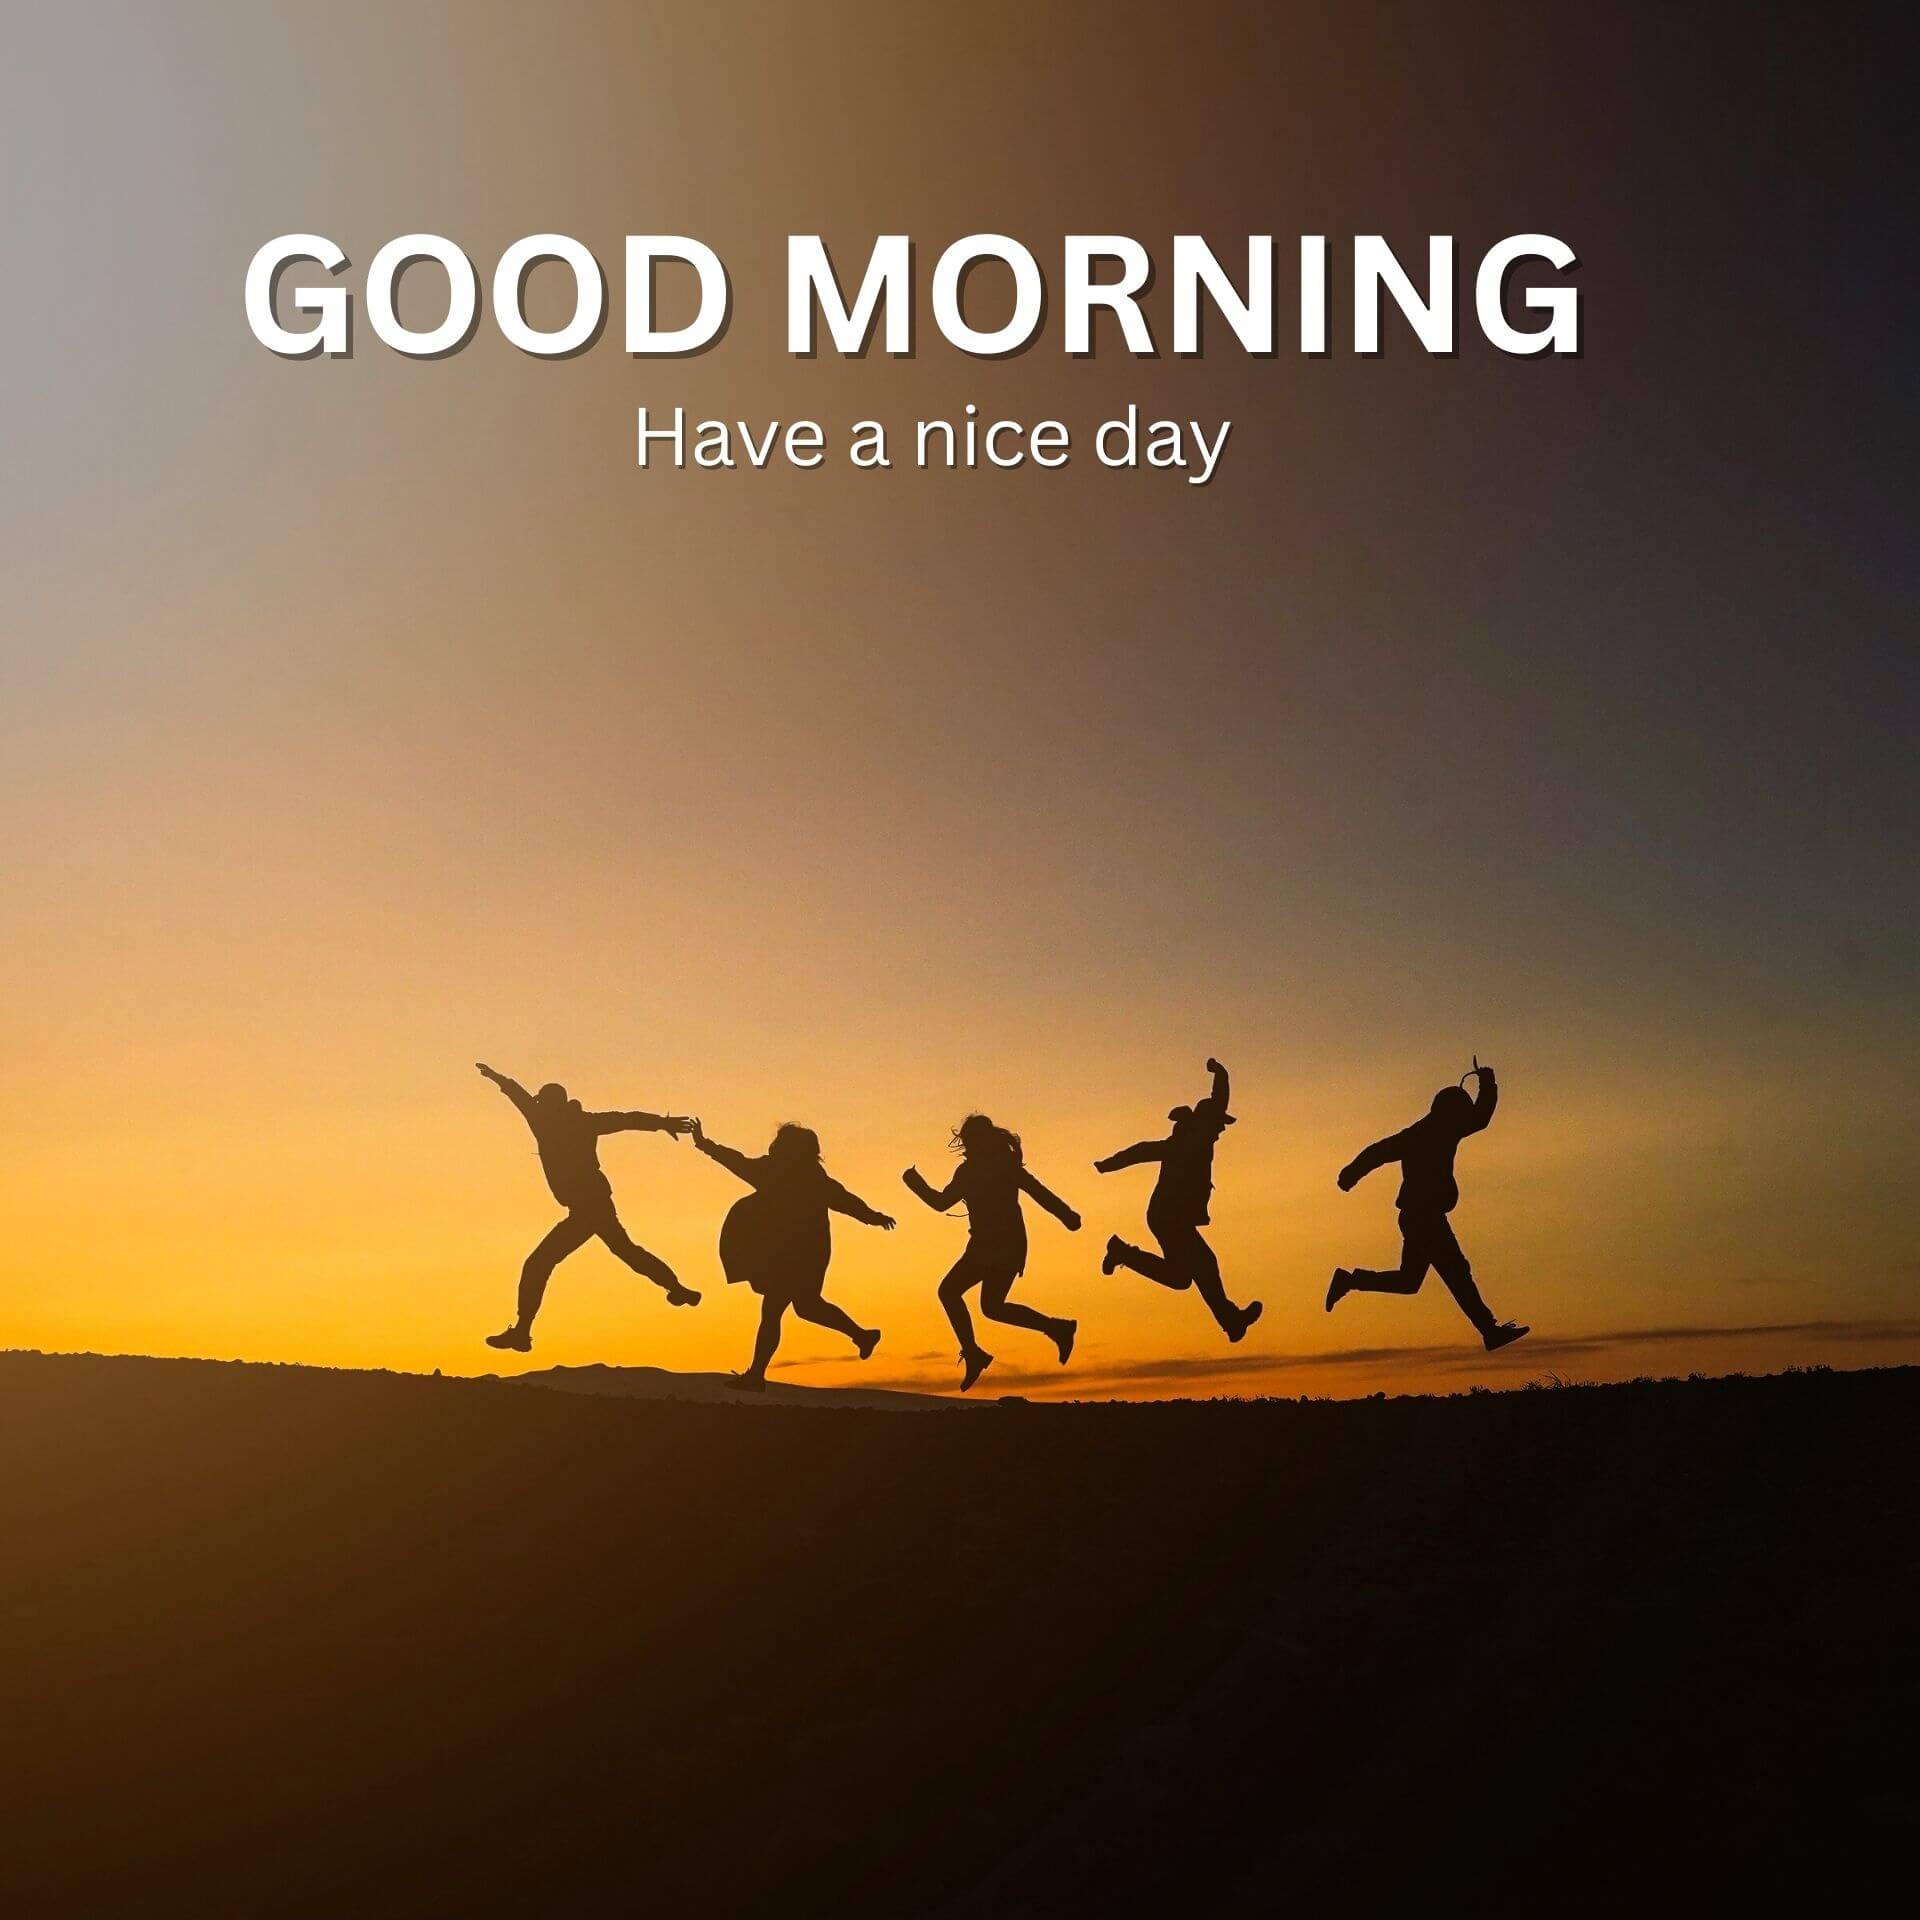 Happy Good Morning Images Download